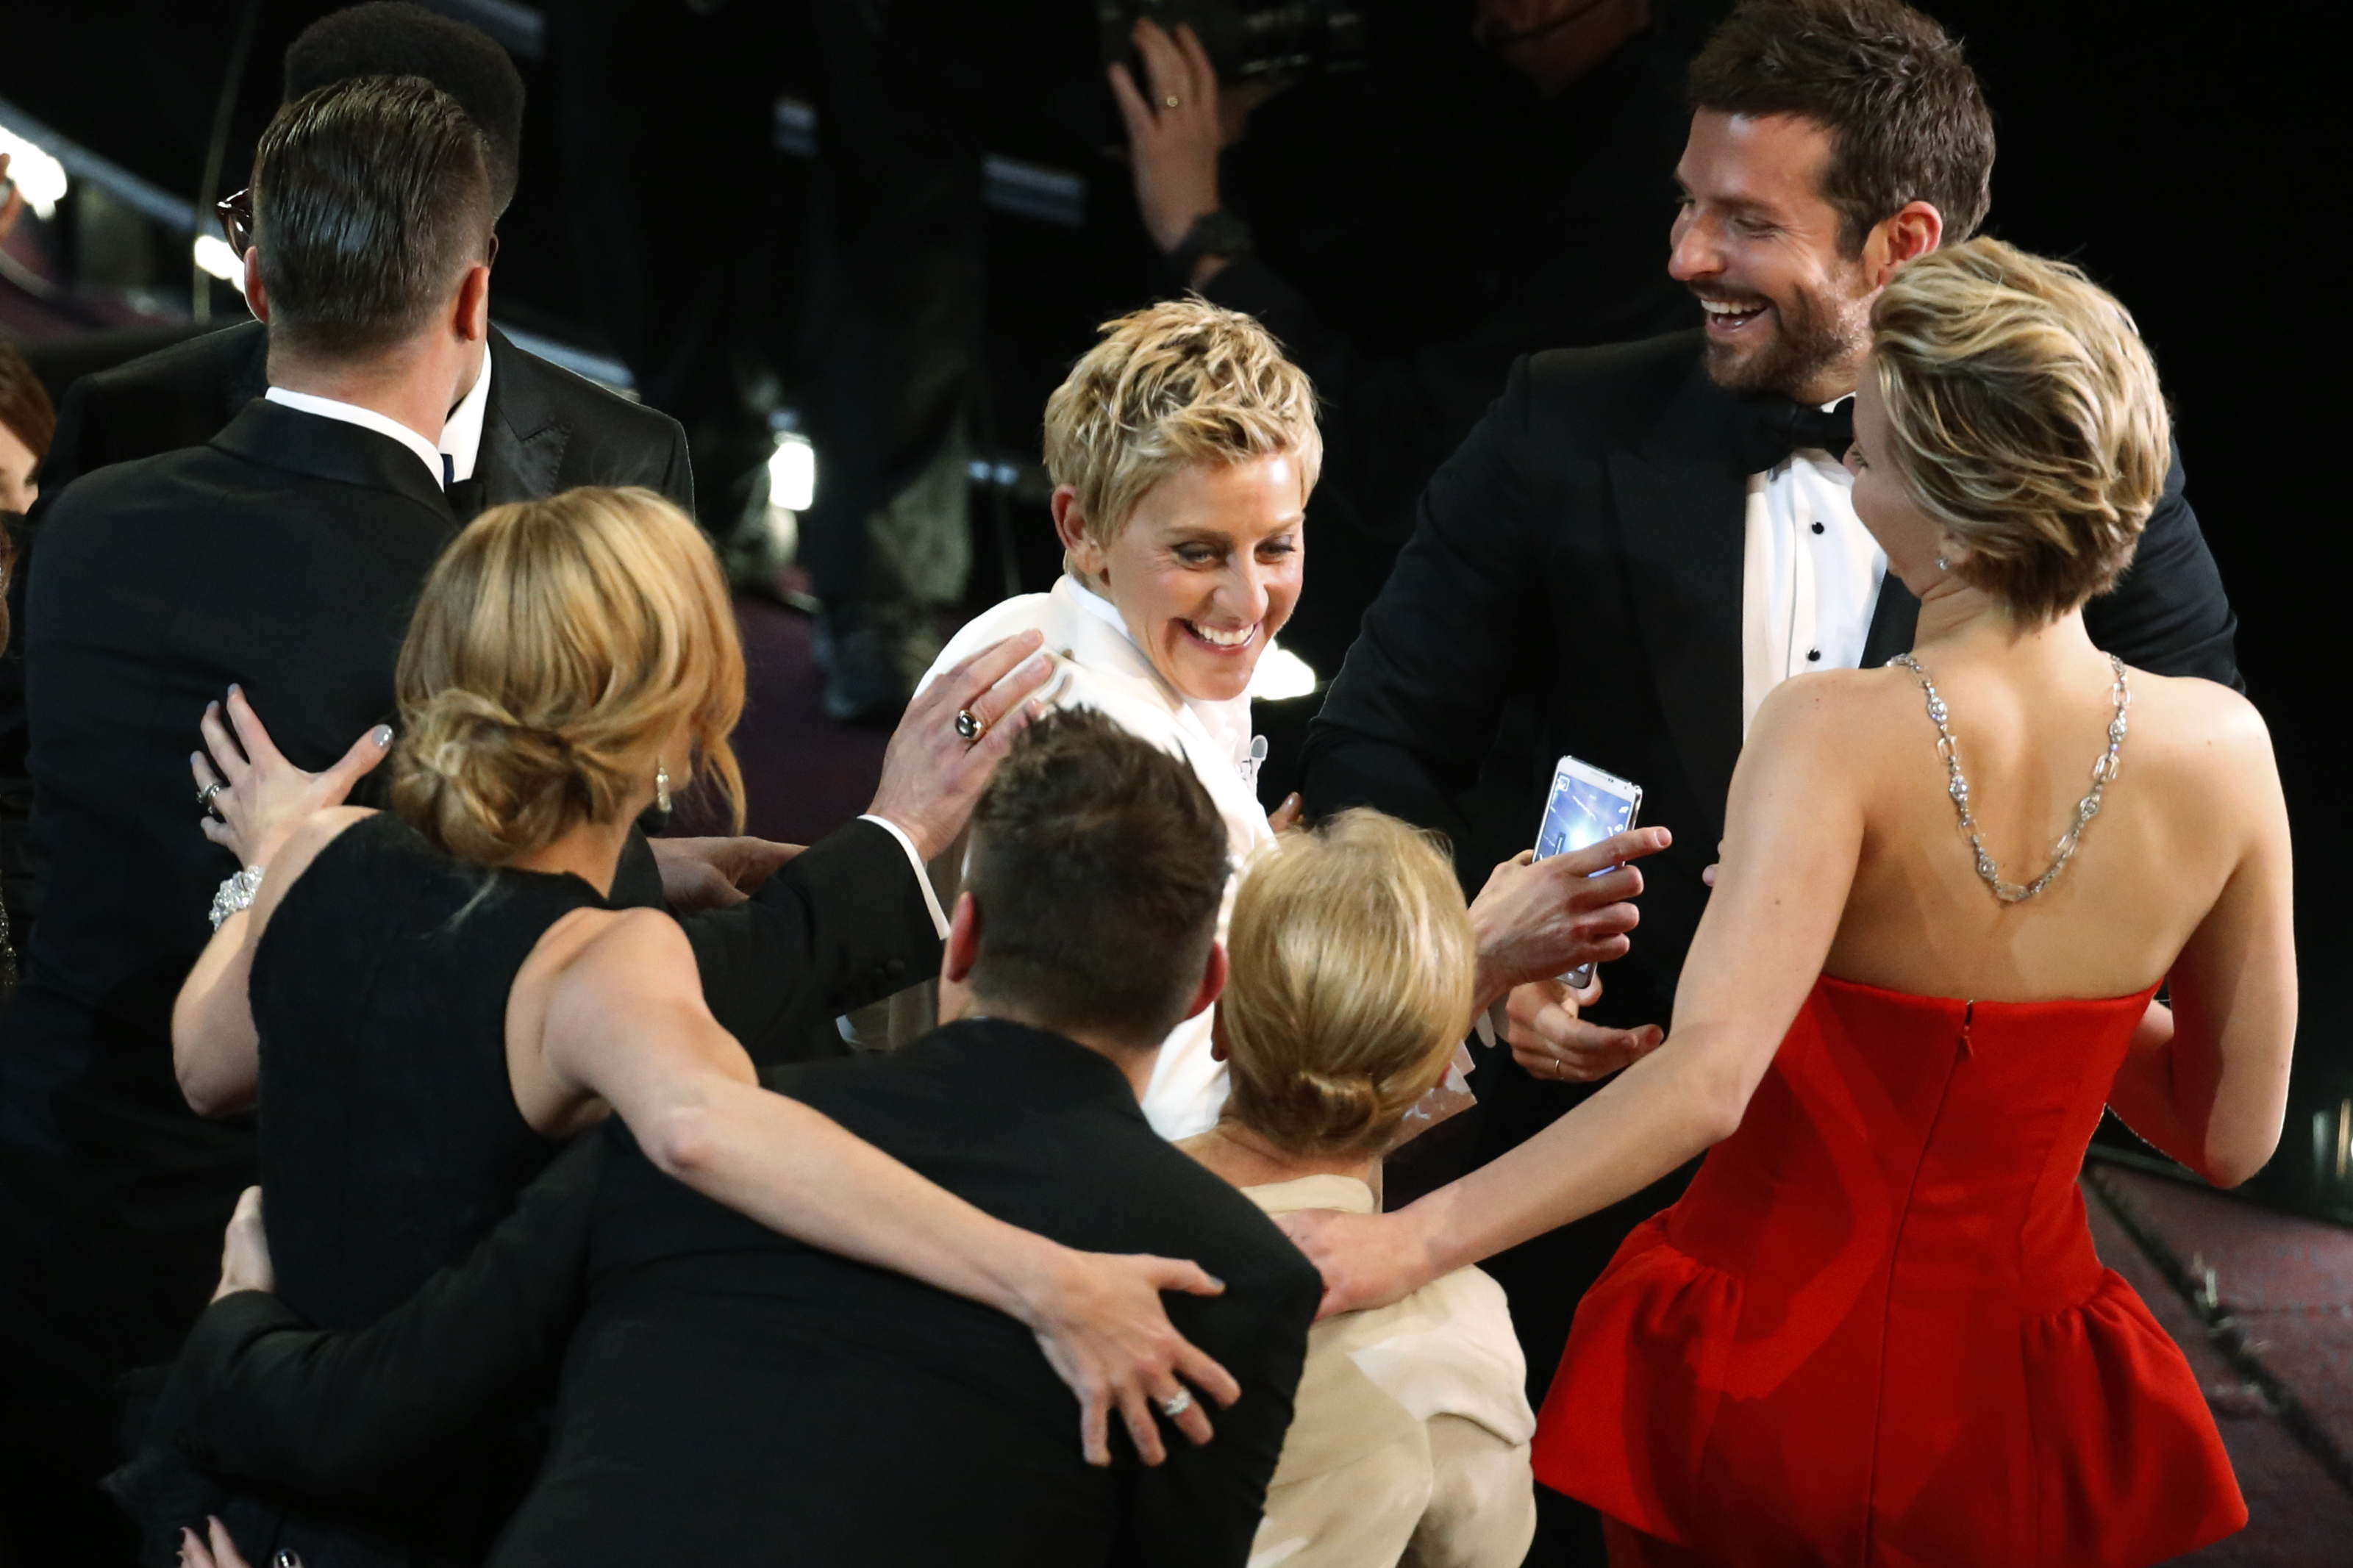 Host Ellen DeGeneres shares a laugh with Oscar nominees after taking a group 